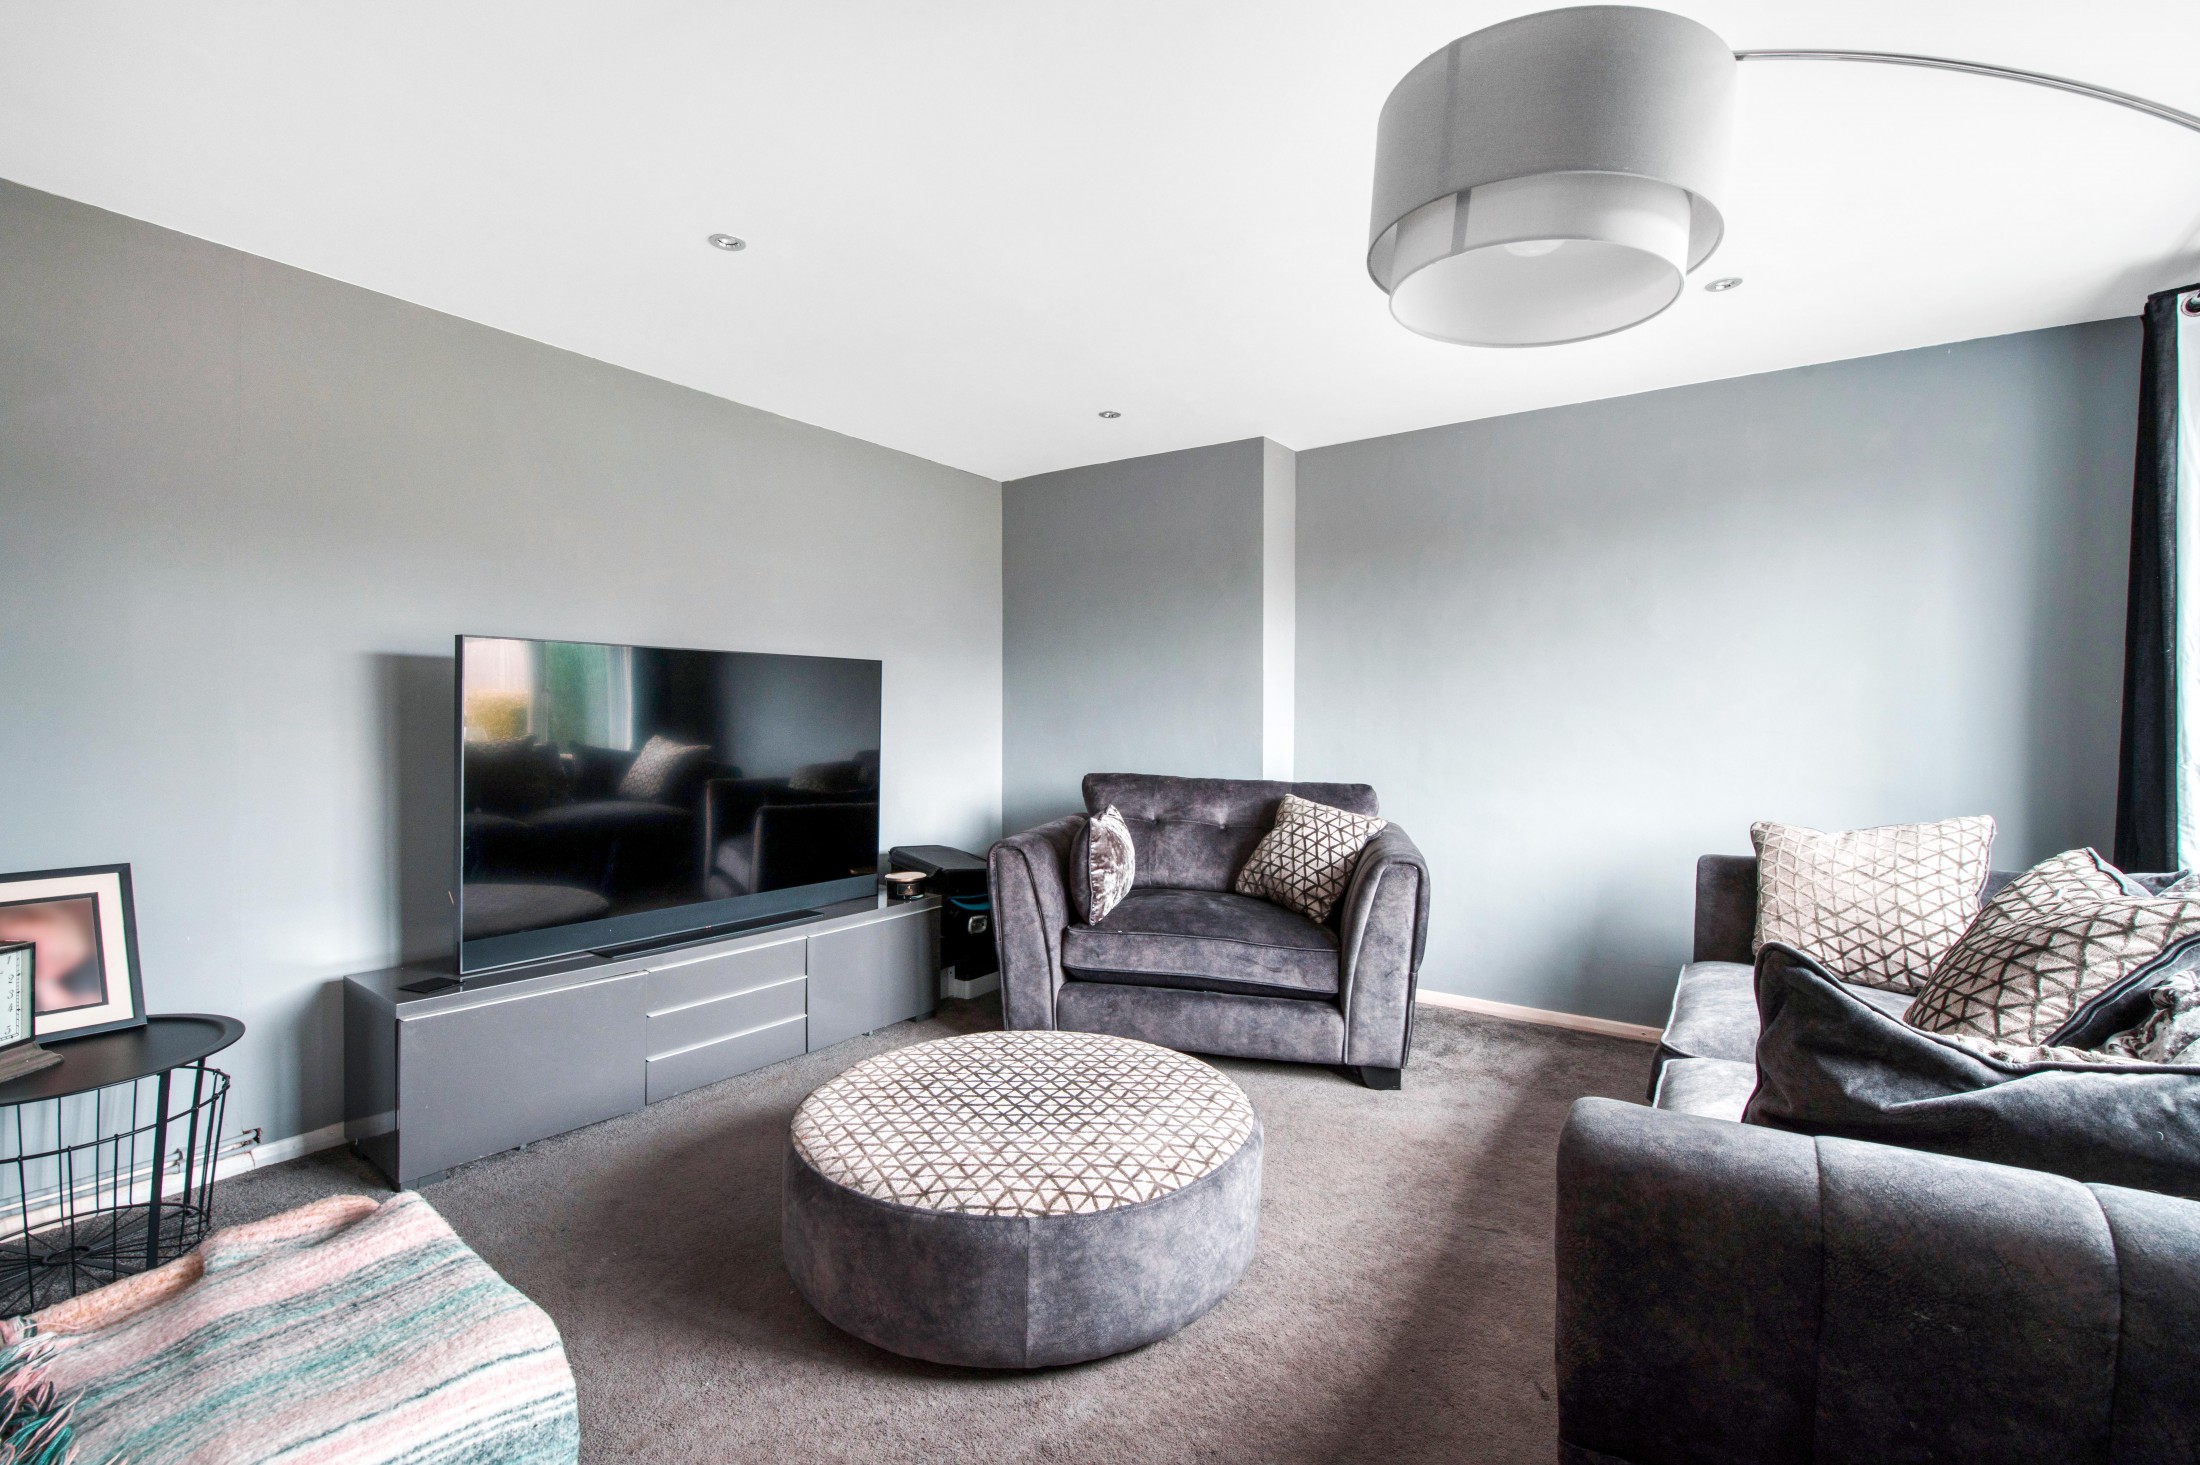 Images for Durrant Way, Orpington, BR6